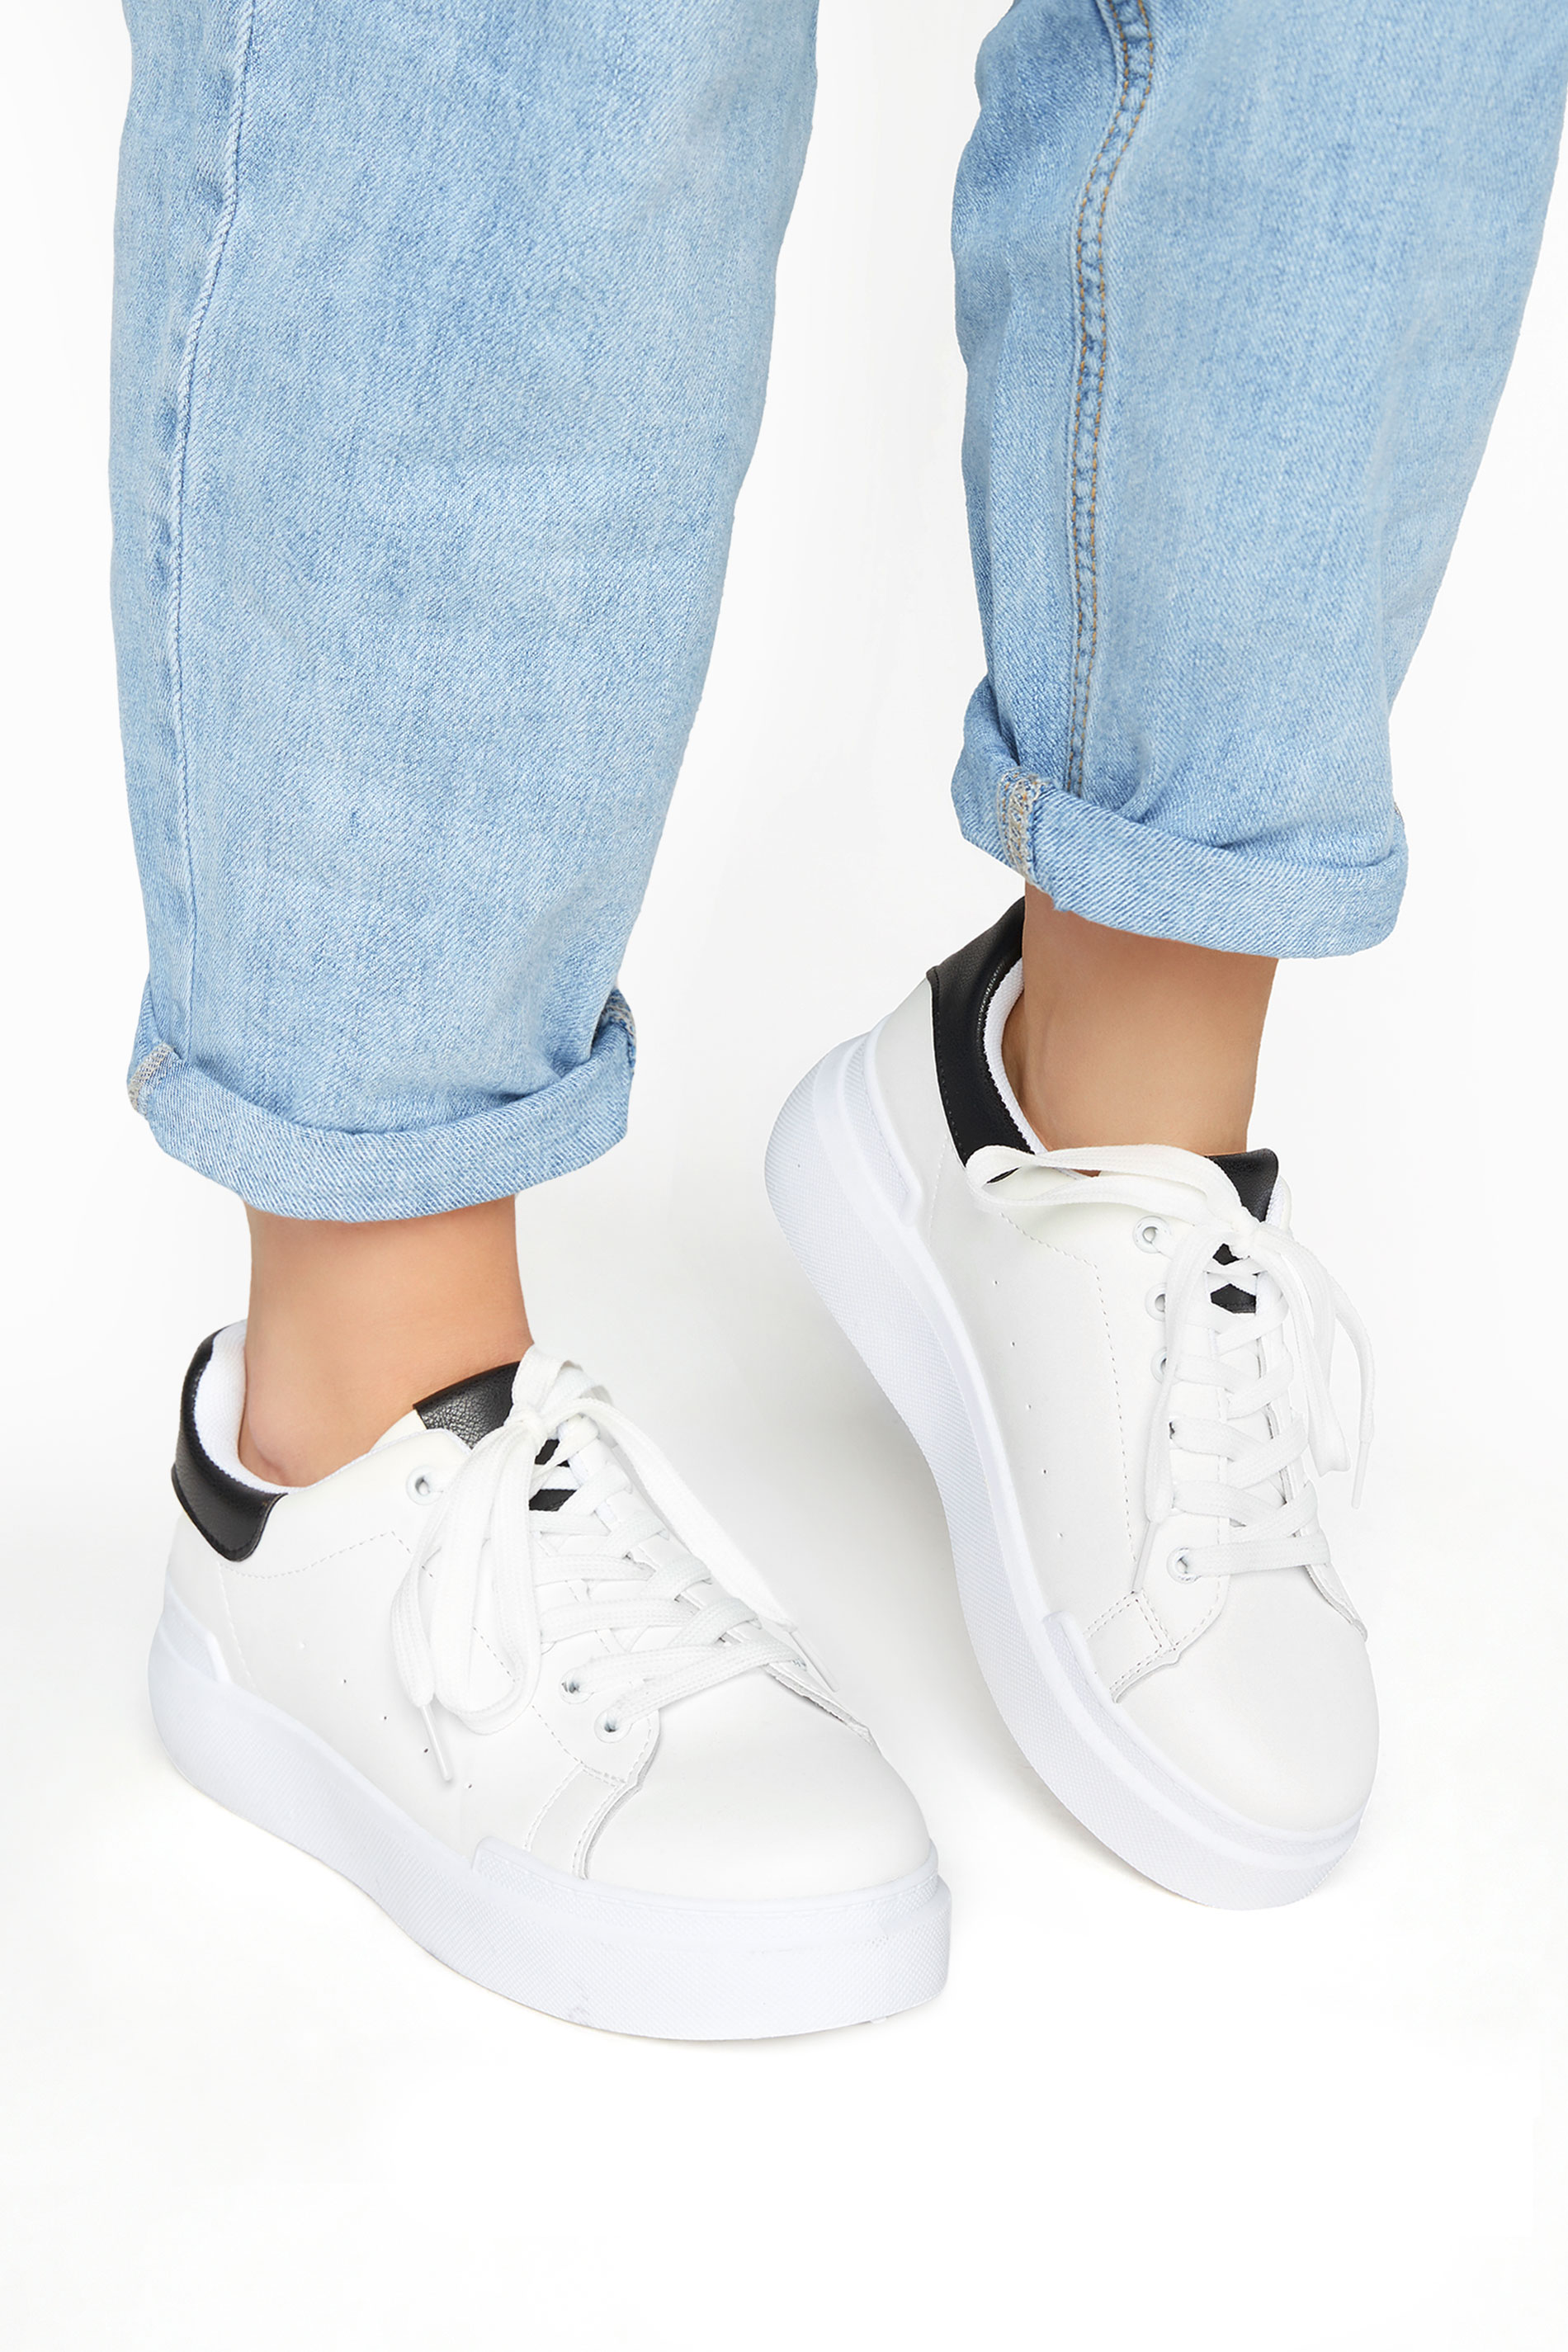 LIMITED COLLECTION White and Black Flatform Trainer In Wide E Fit 1